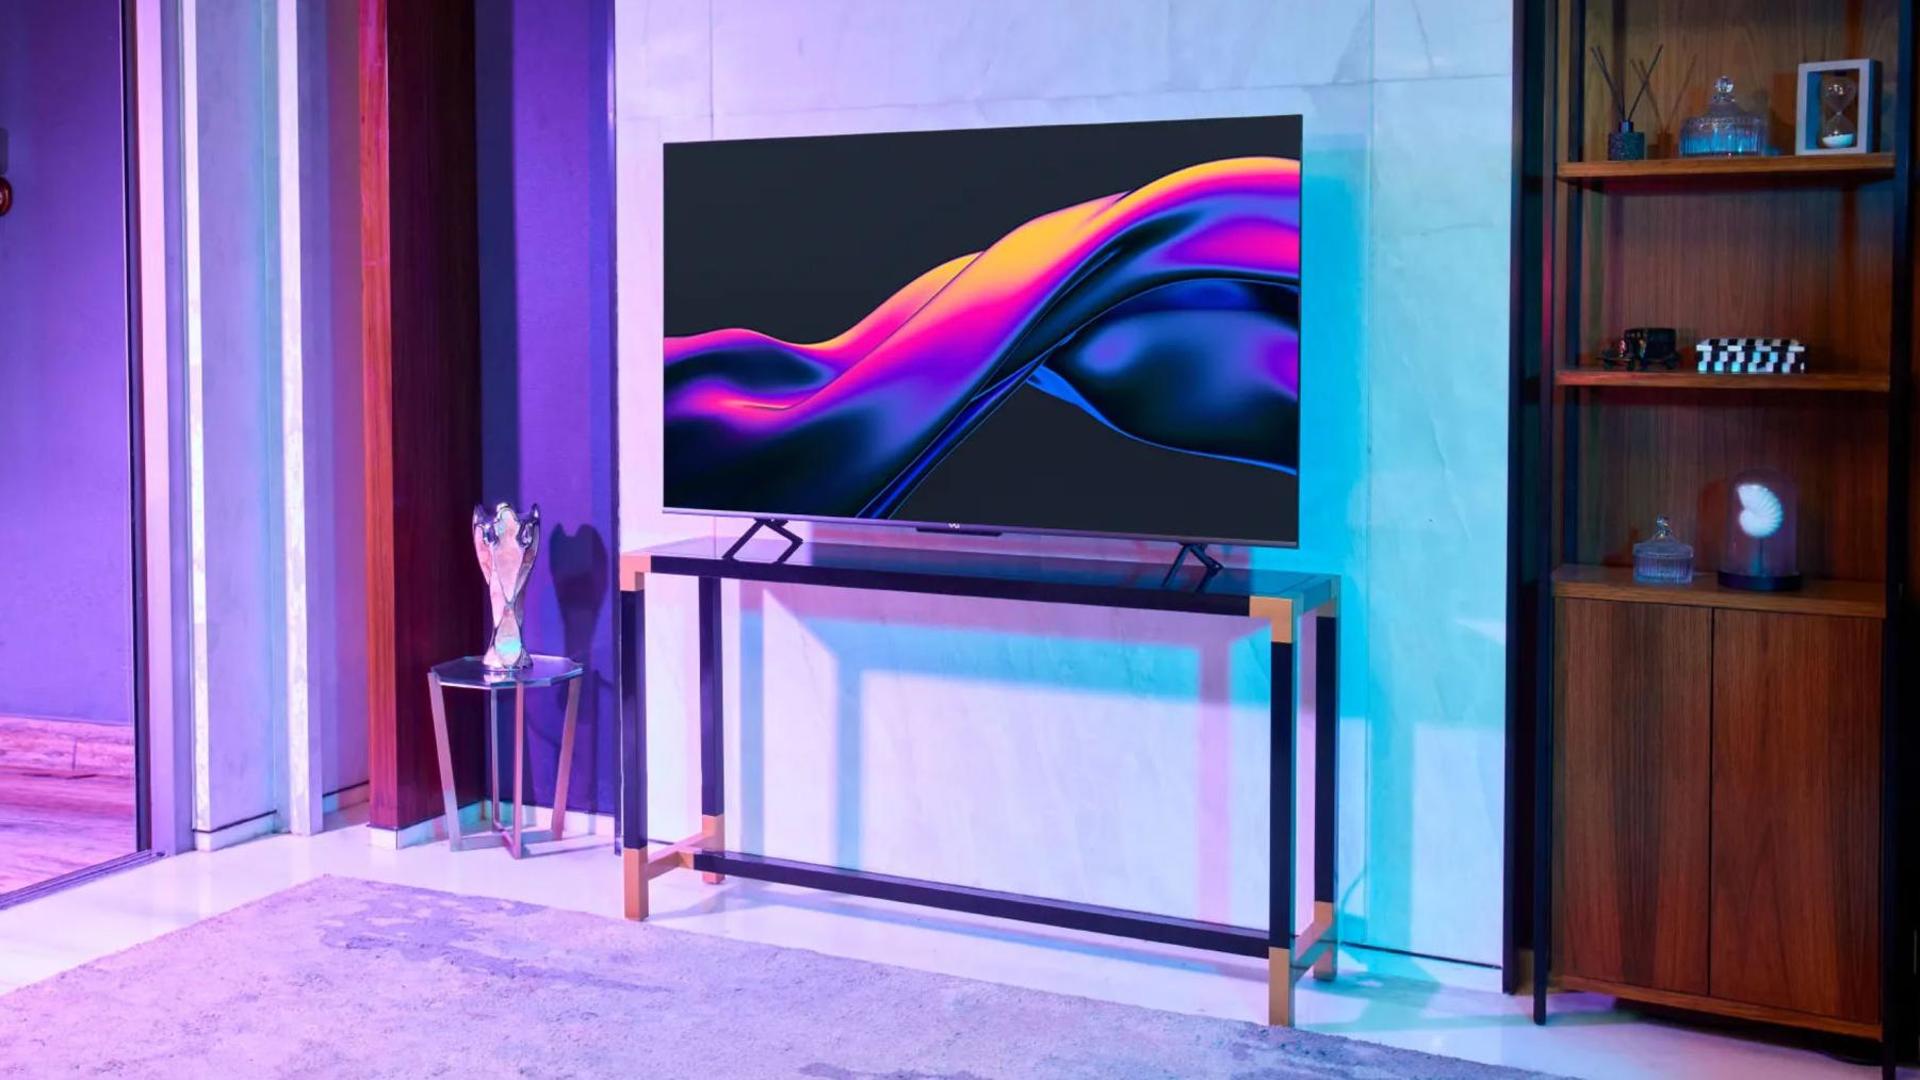 Vu GloLED TV (43-inch) launched at Rs. 30,000: Check features